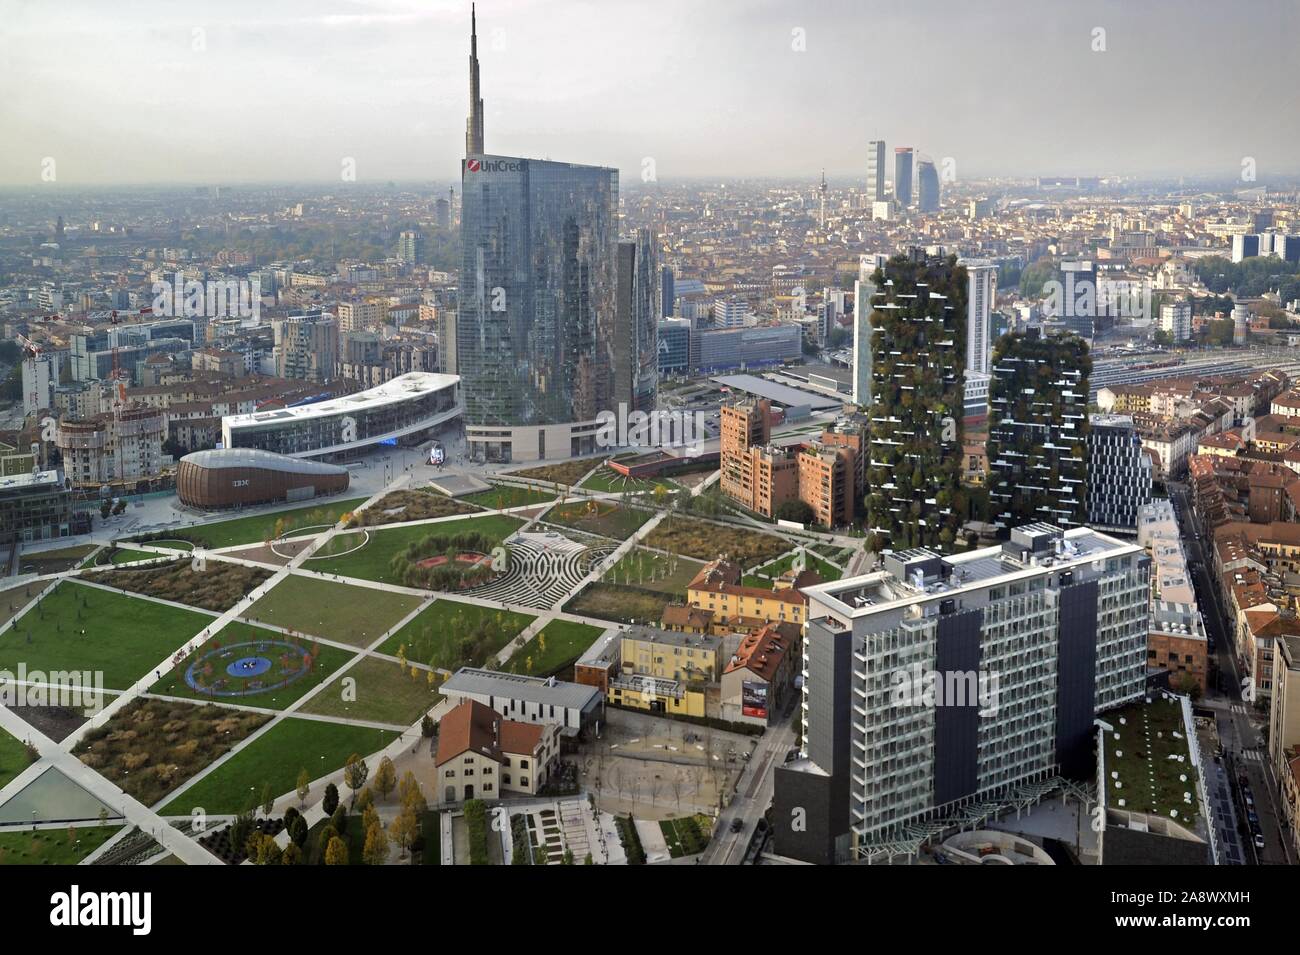 Milan (Italy), view from the rooftop terrace of the Lombardy Region building, the Unicredit and Vertical Forest skyscrapers and the Trees Library park Stock Photo